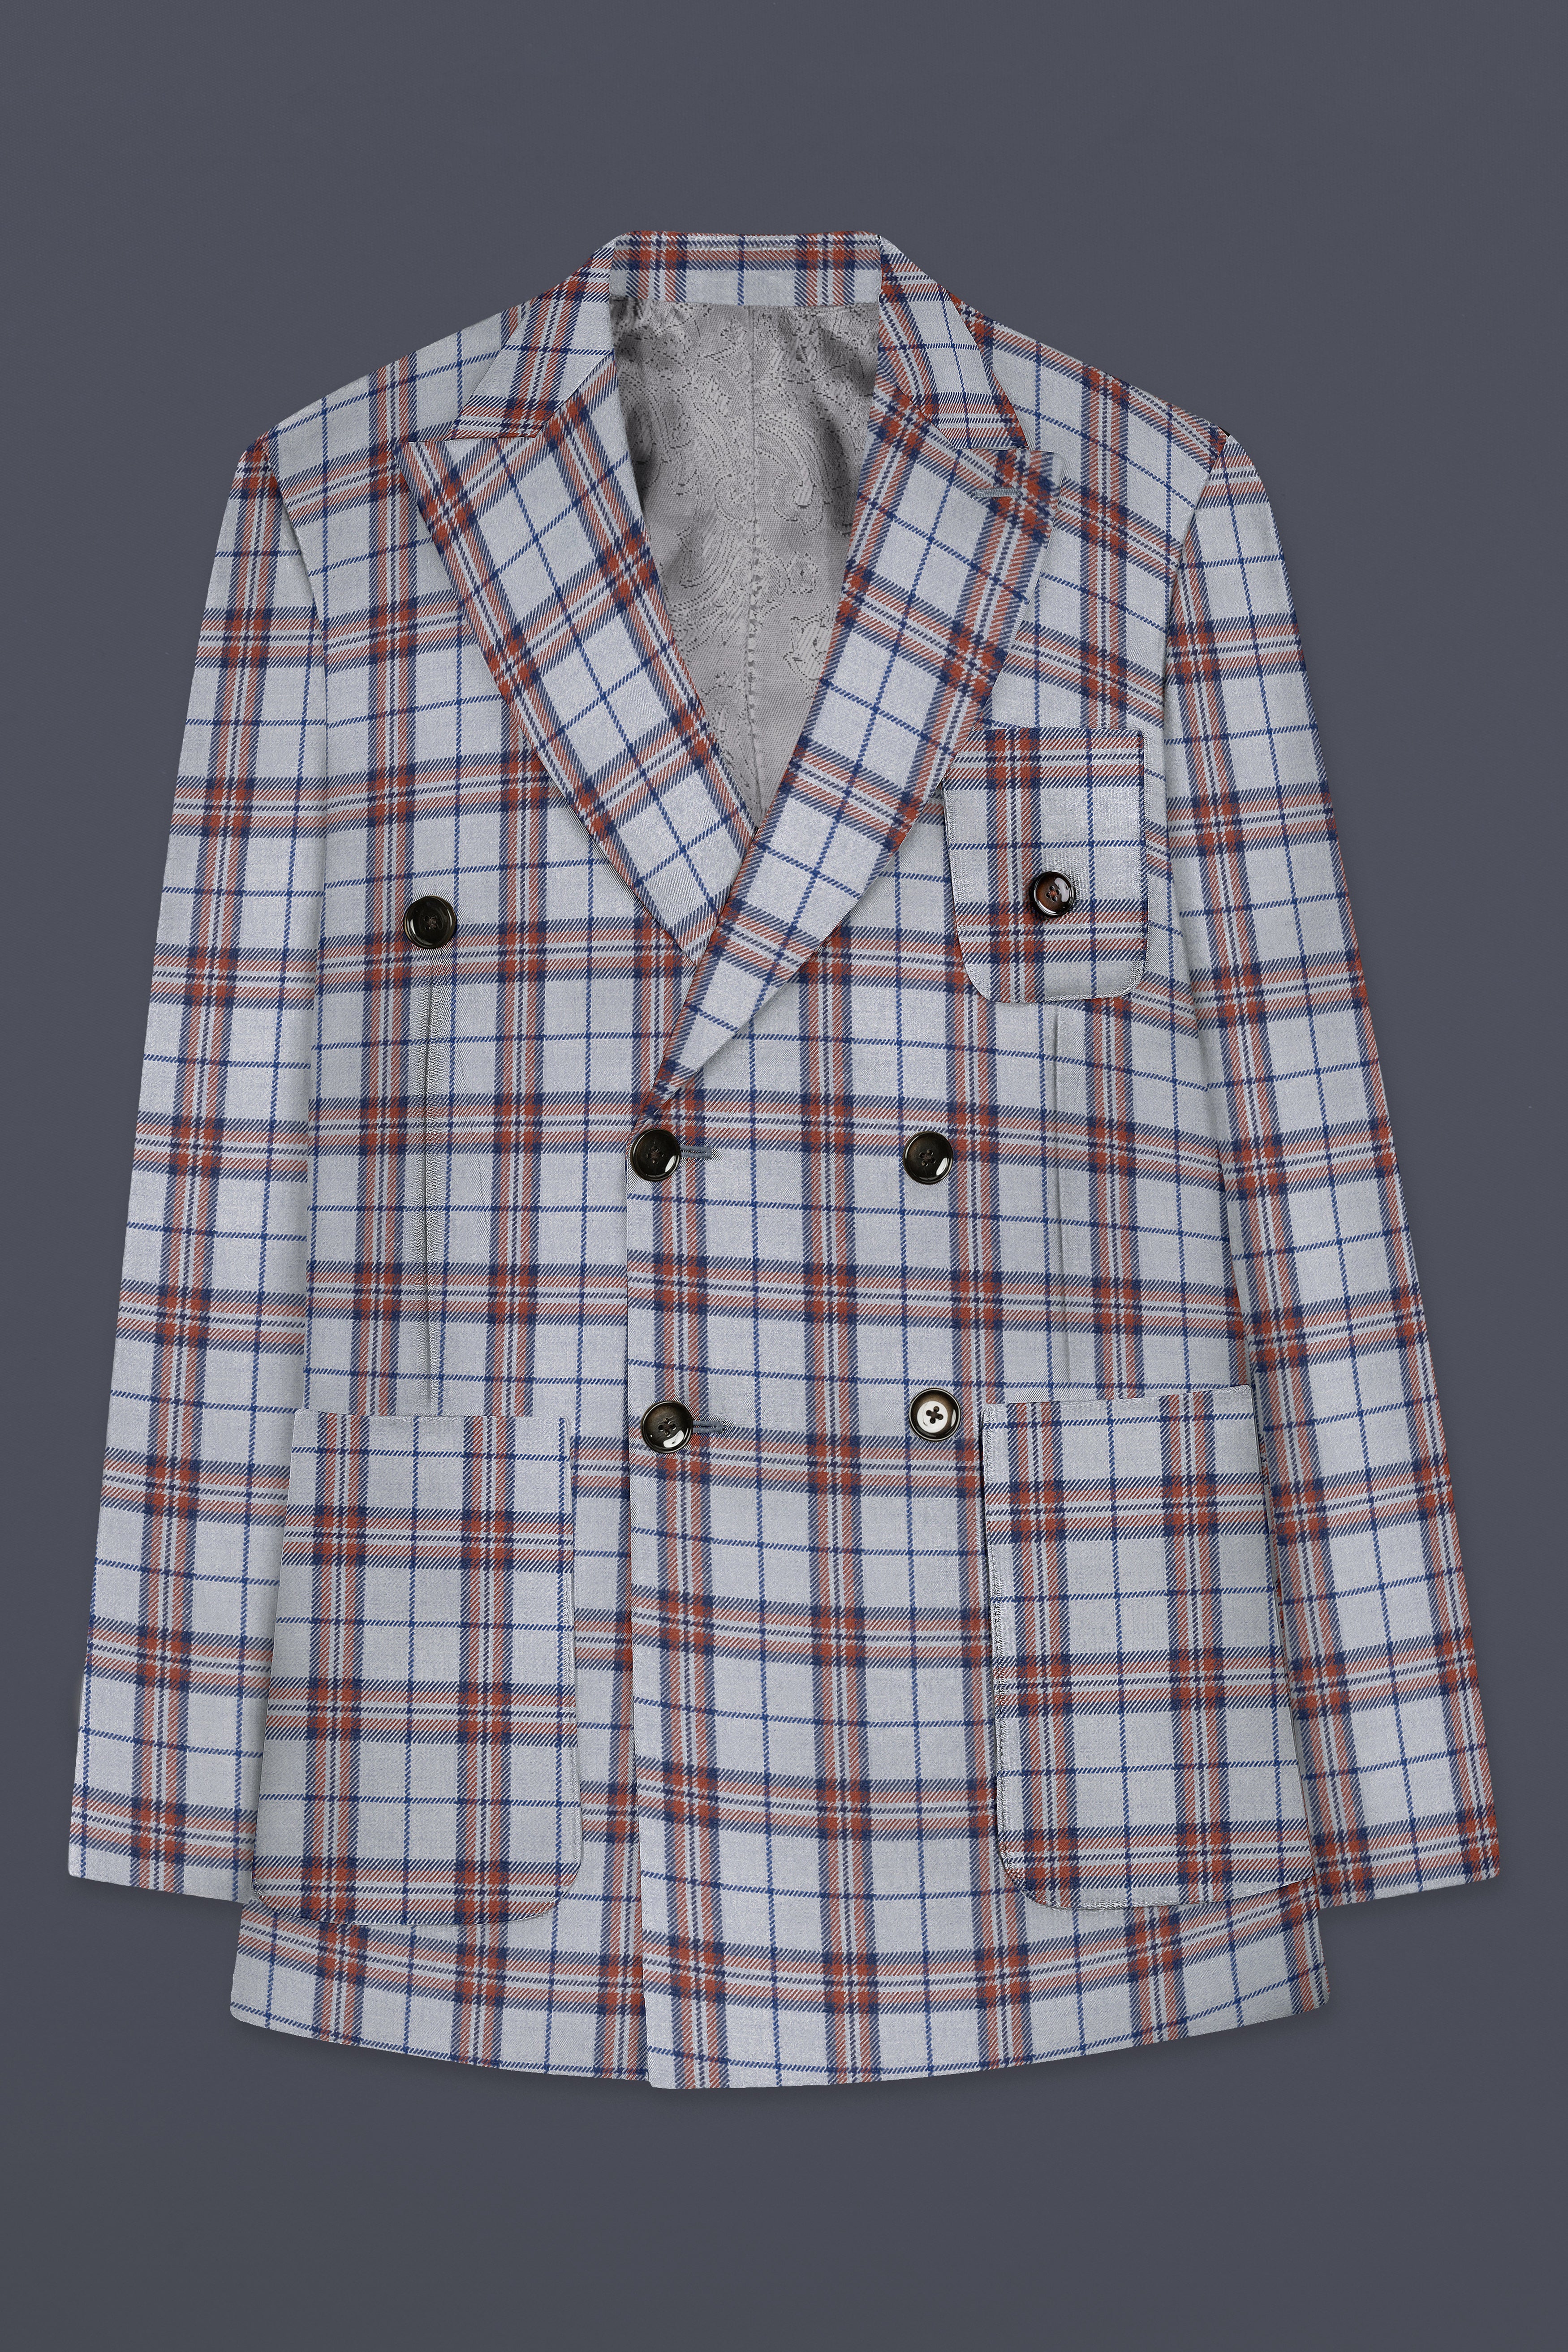 Cadet Grey with Maroon and Blue Plaid Double Breasted Tweed Blazer